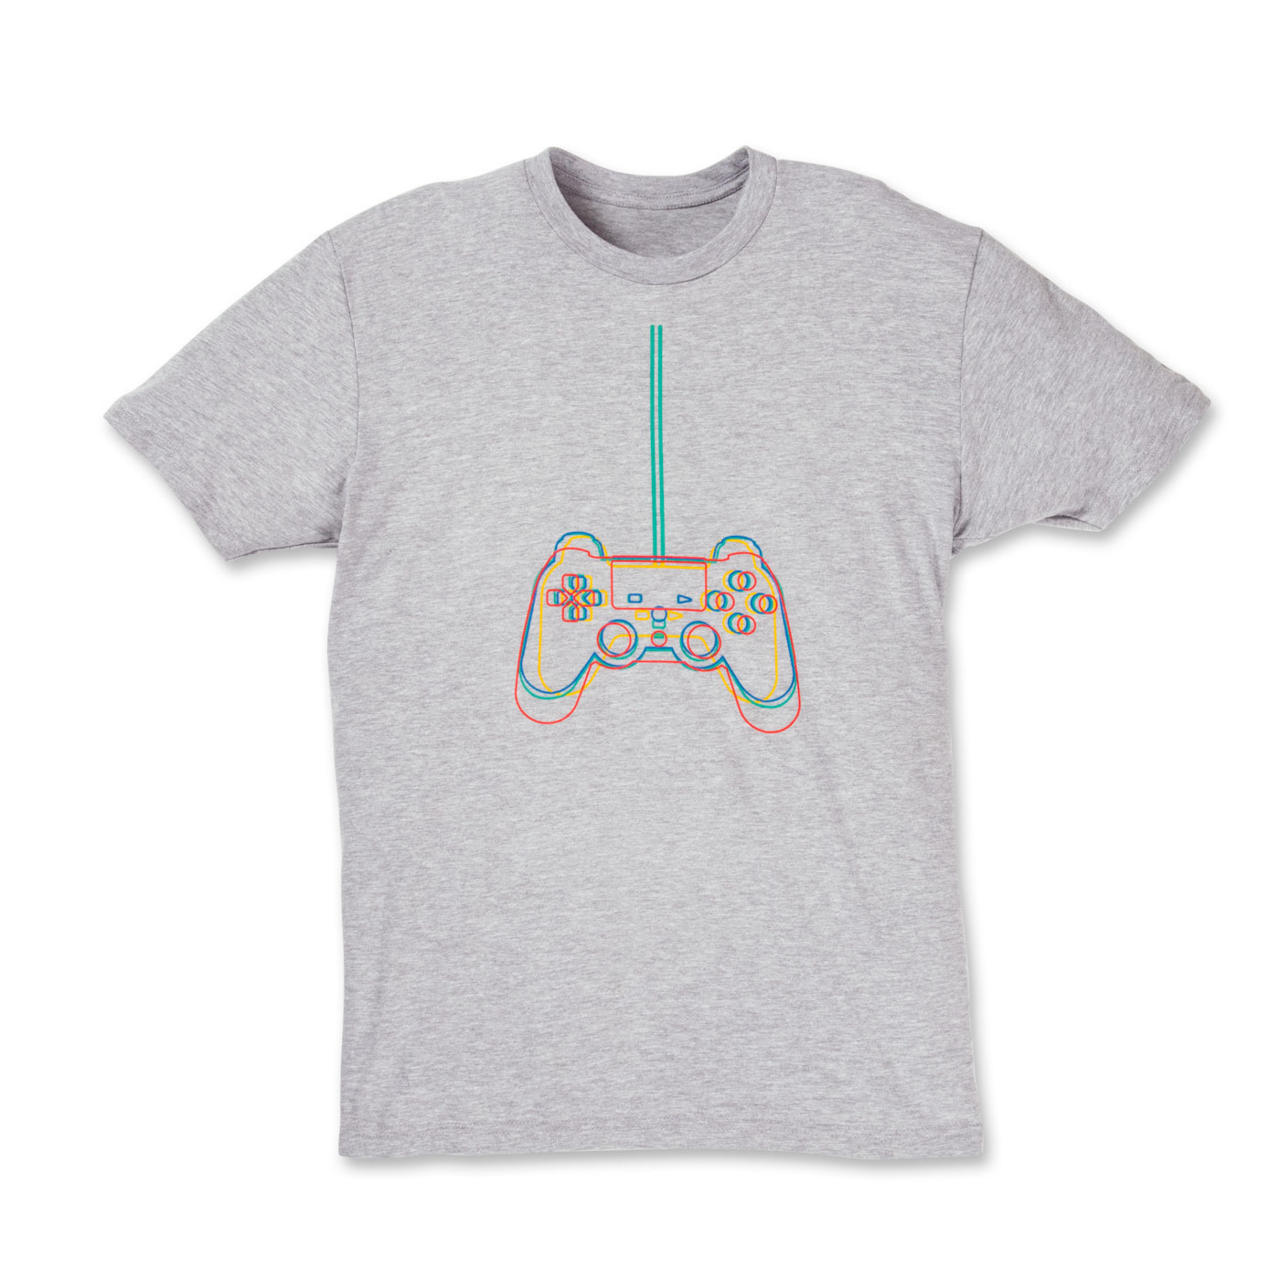 Sony Relaunches PlayStation Gear Store With New Apparel, Accessories ...